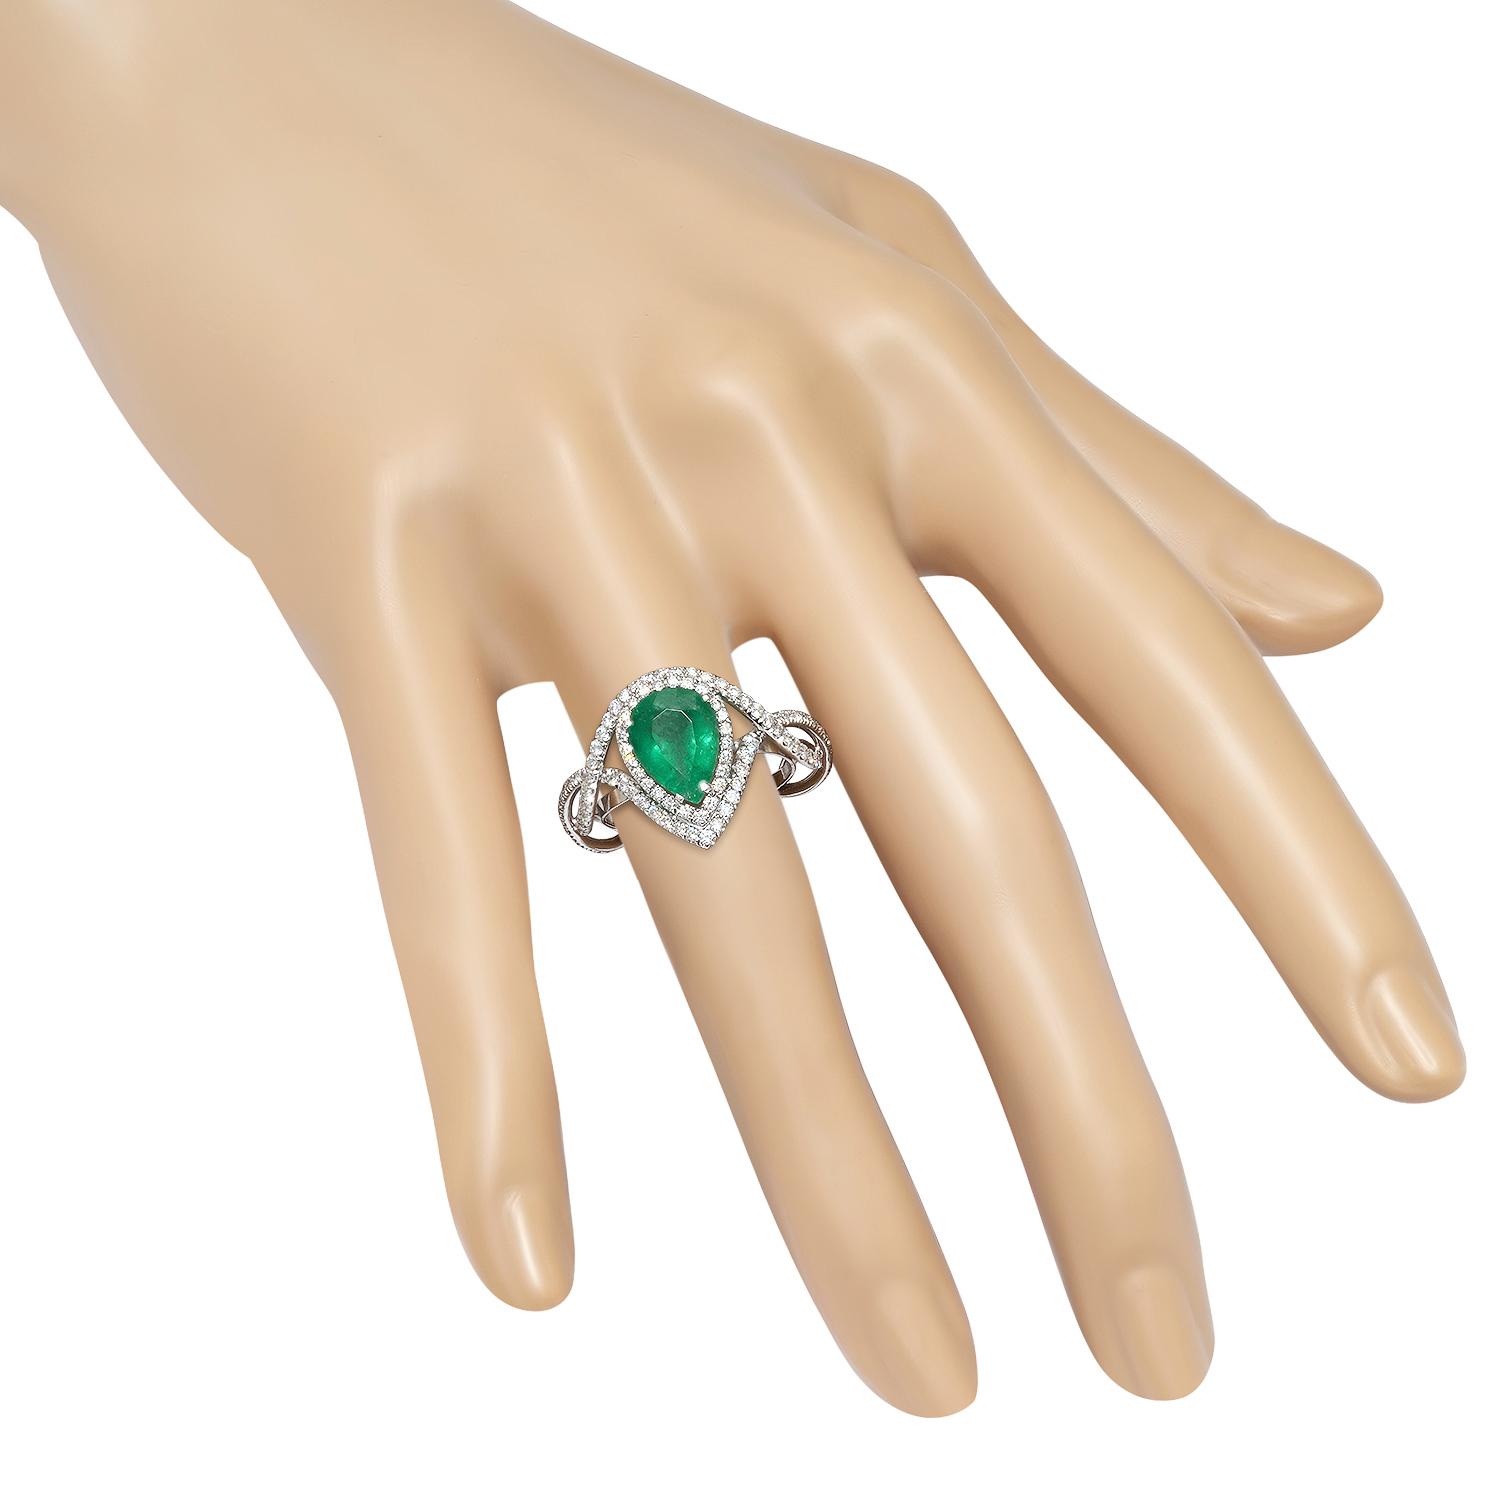 14K White Gold Setting with 2.50ct Emerald and 1.19ct Diamond Ladies Ring